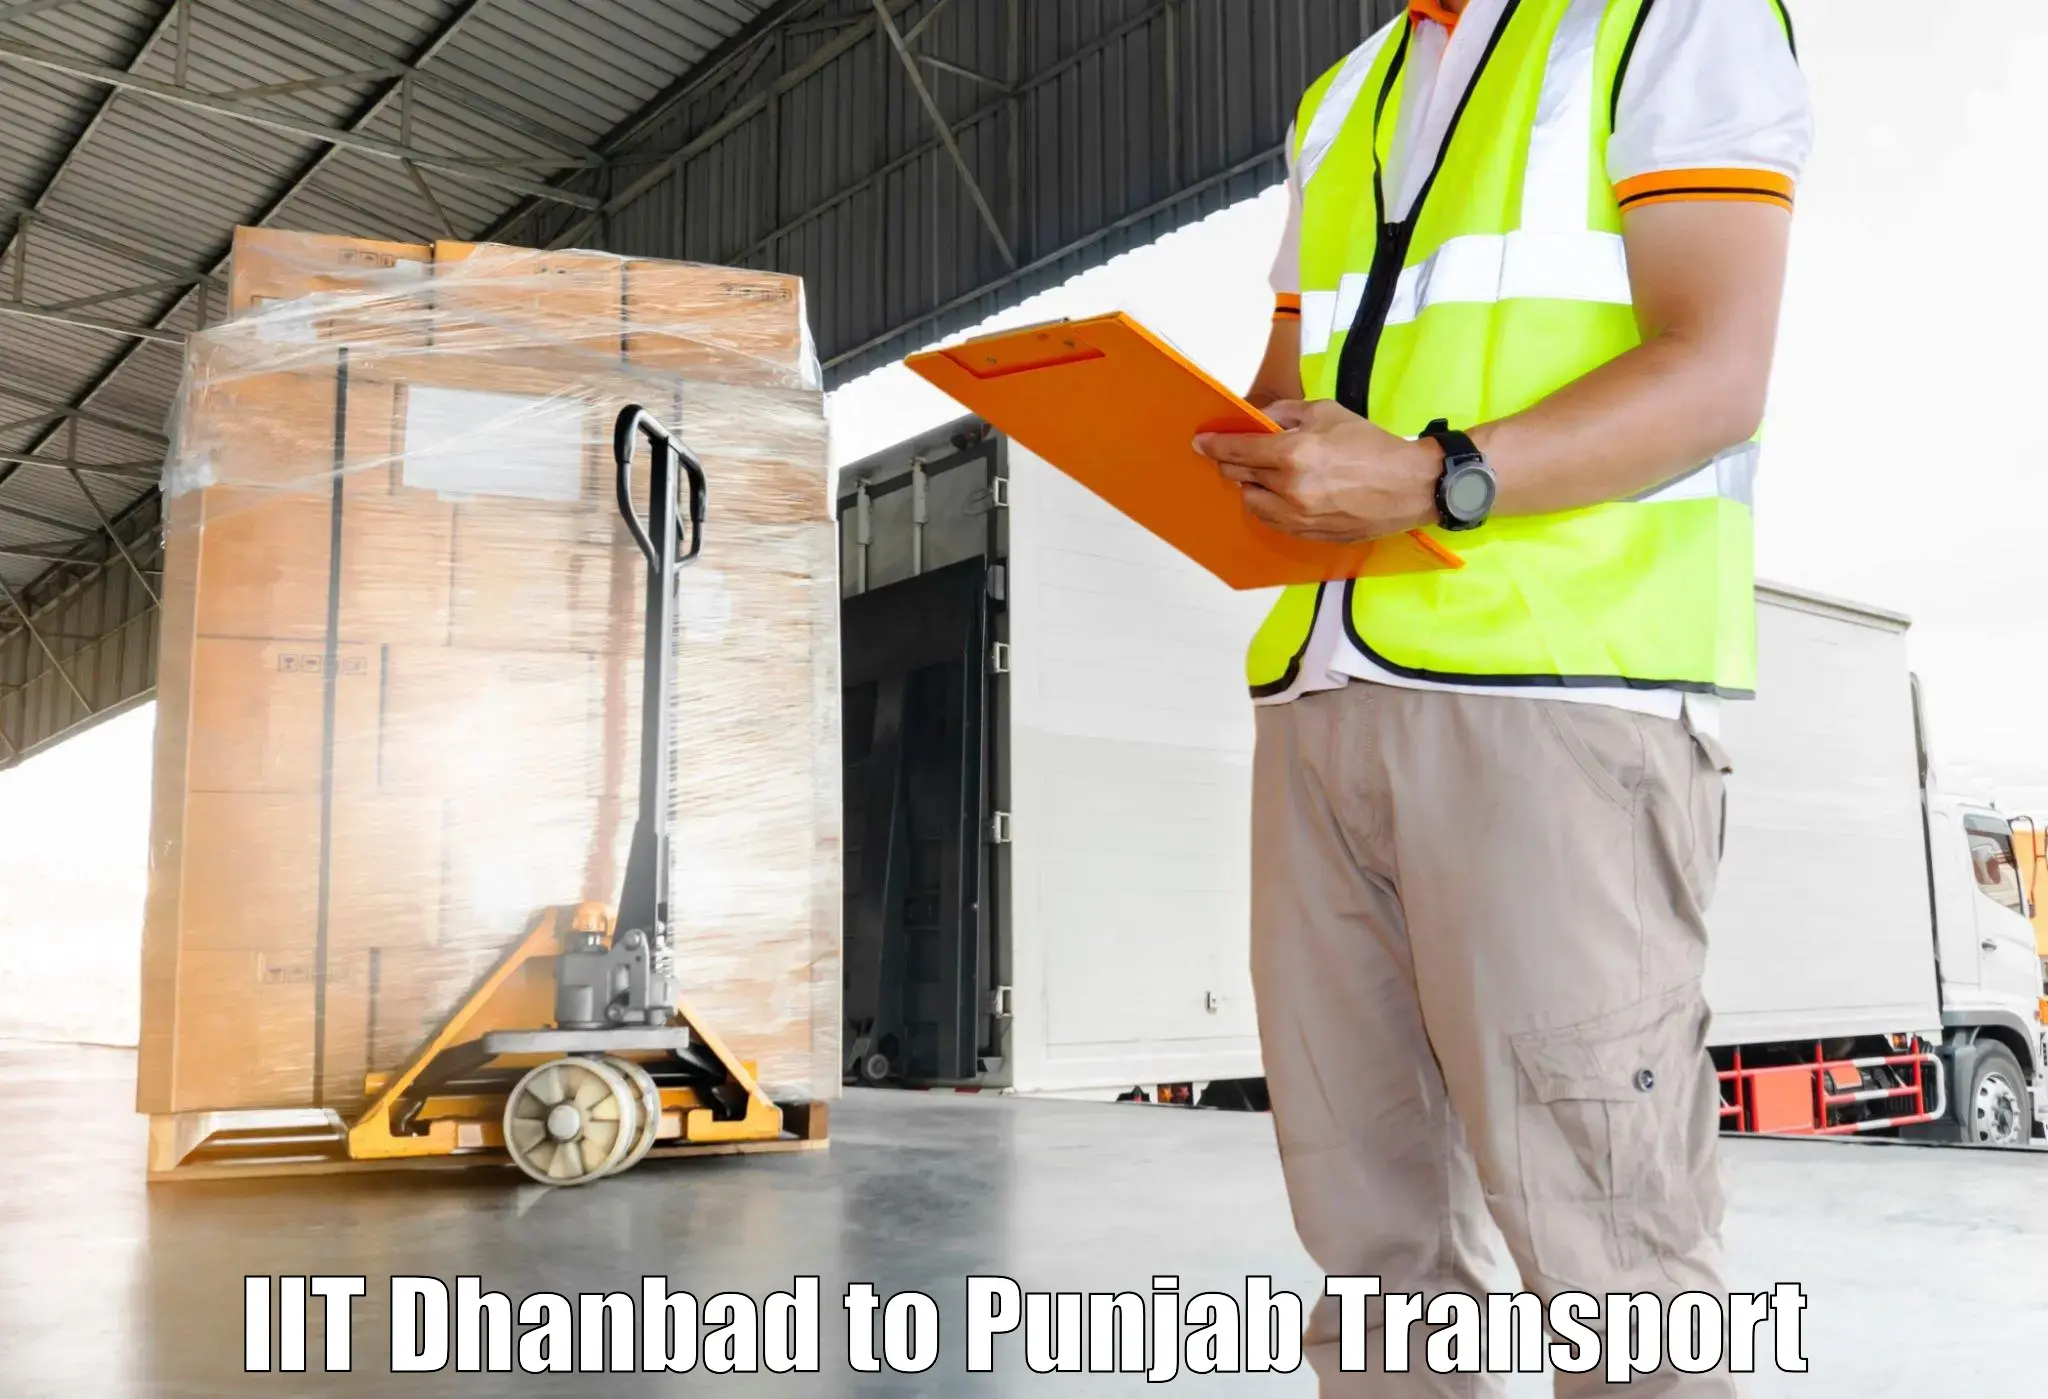 All India transport service IIT Dhanbad to Goindwal Sahib